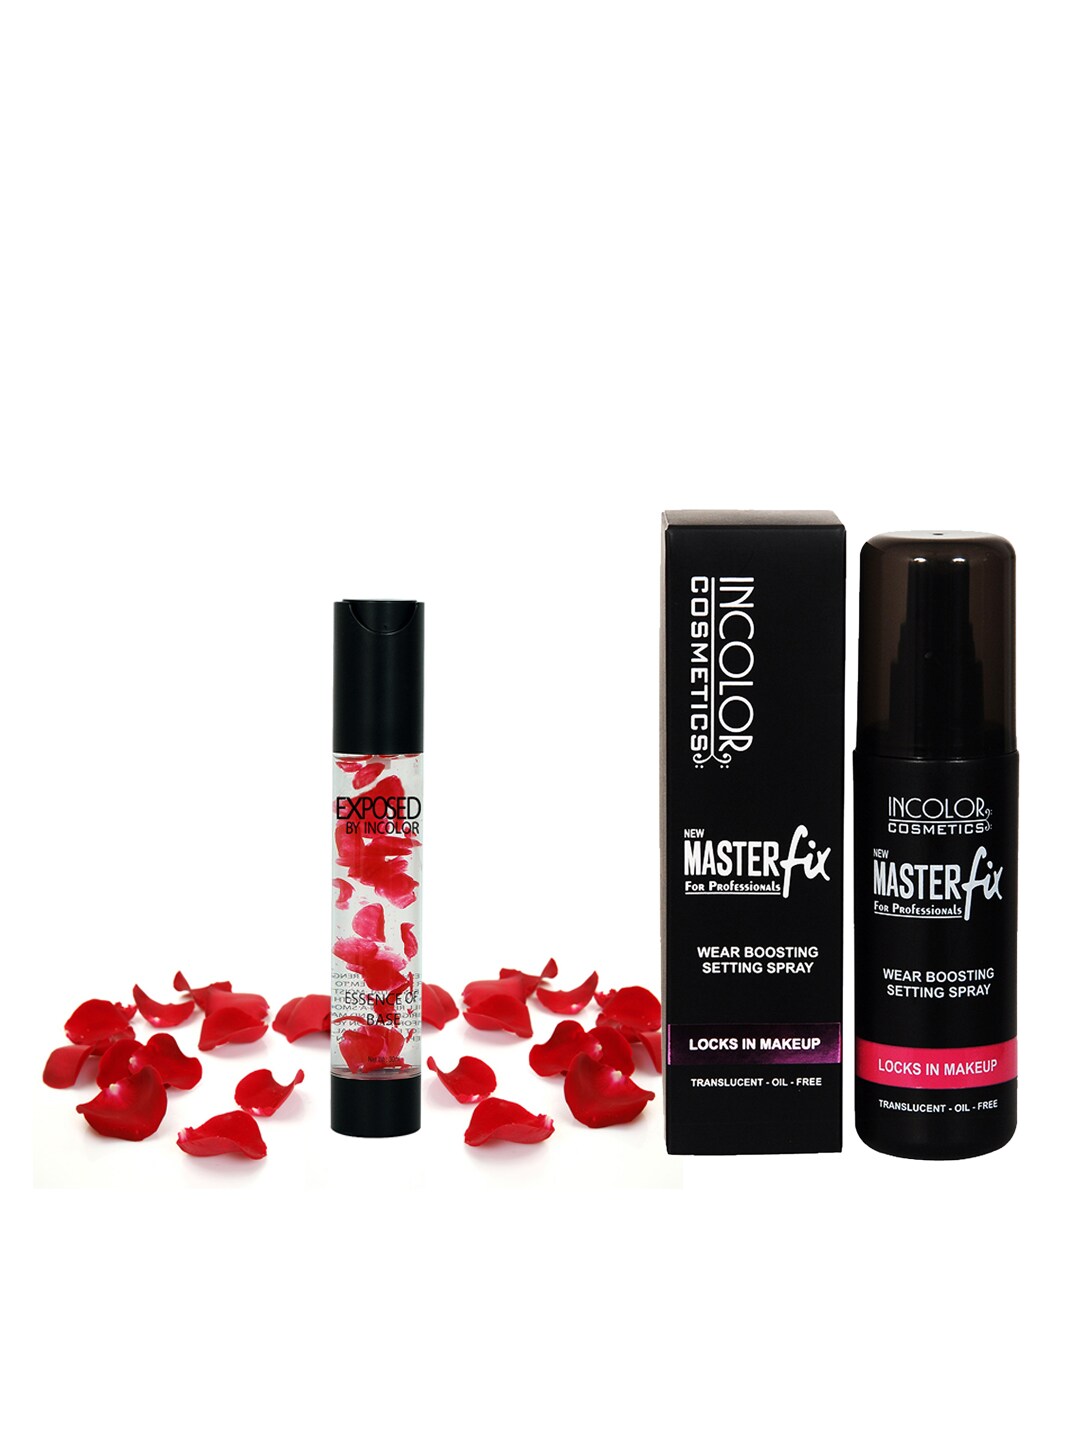 INCOLOR Master Fix Wear Boosting Setting Spray & Exposed Face Primer Price in India